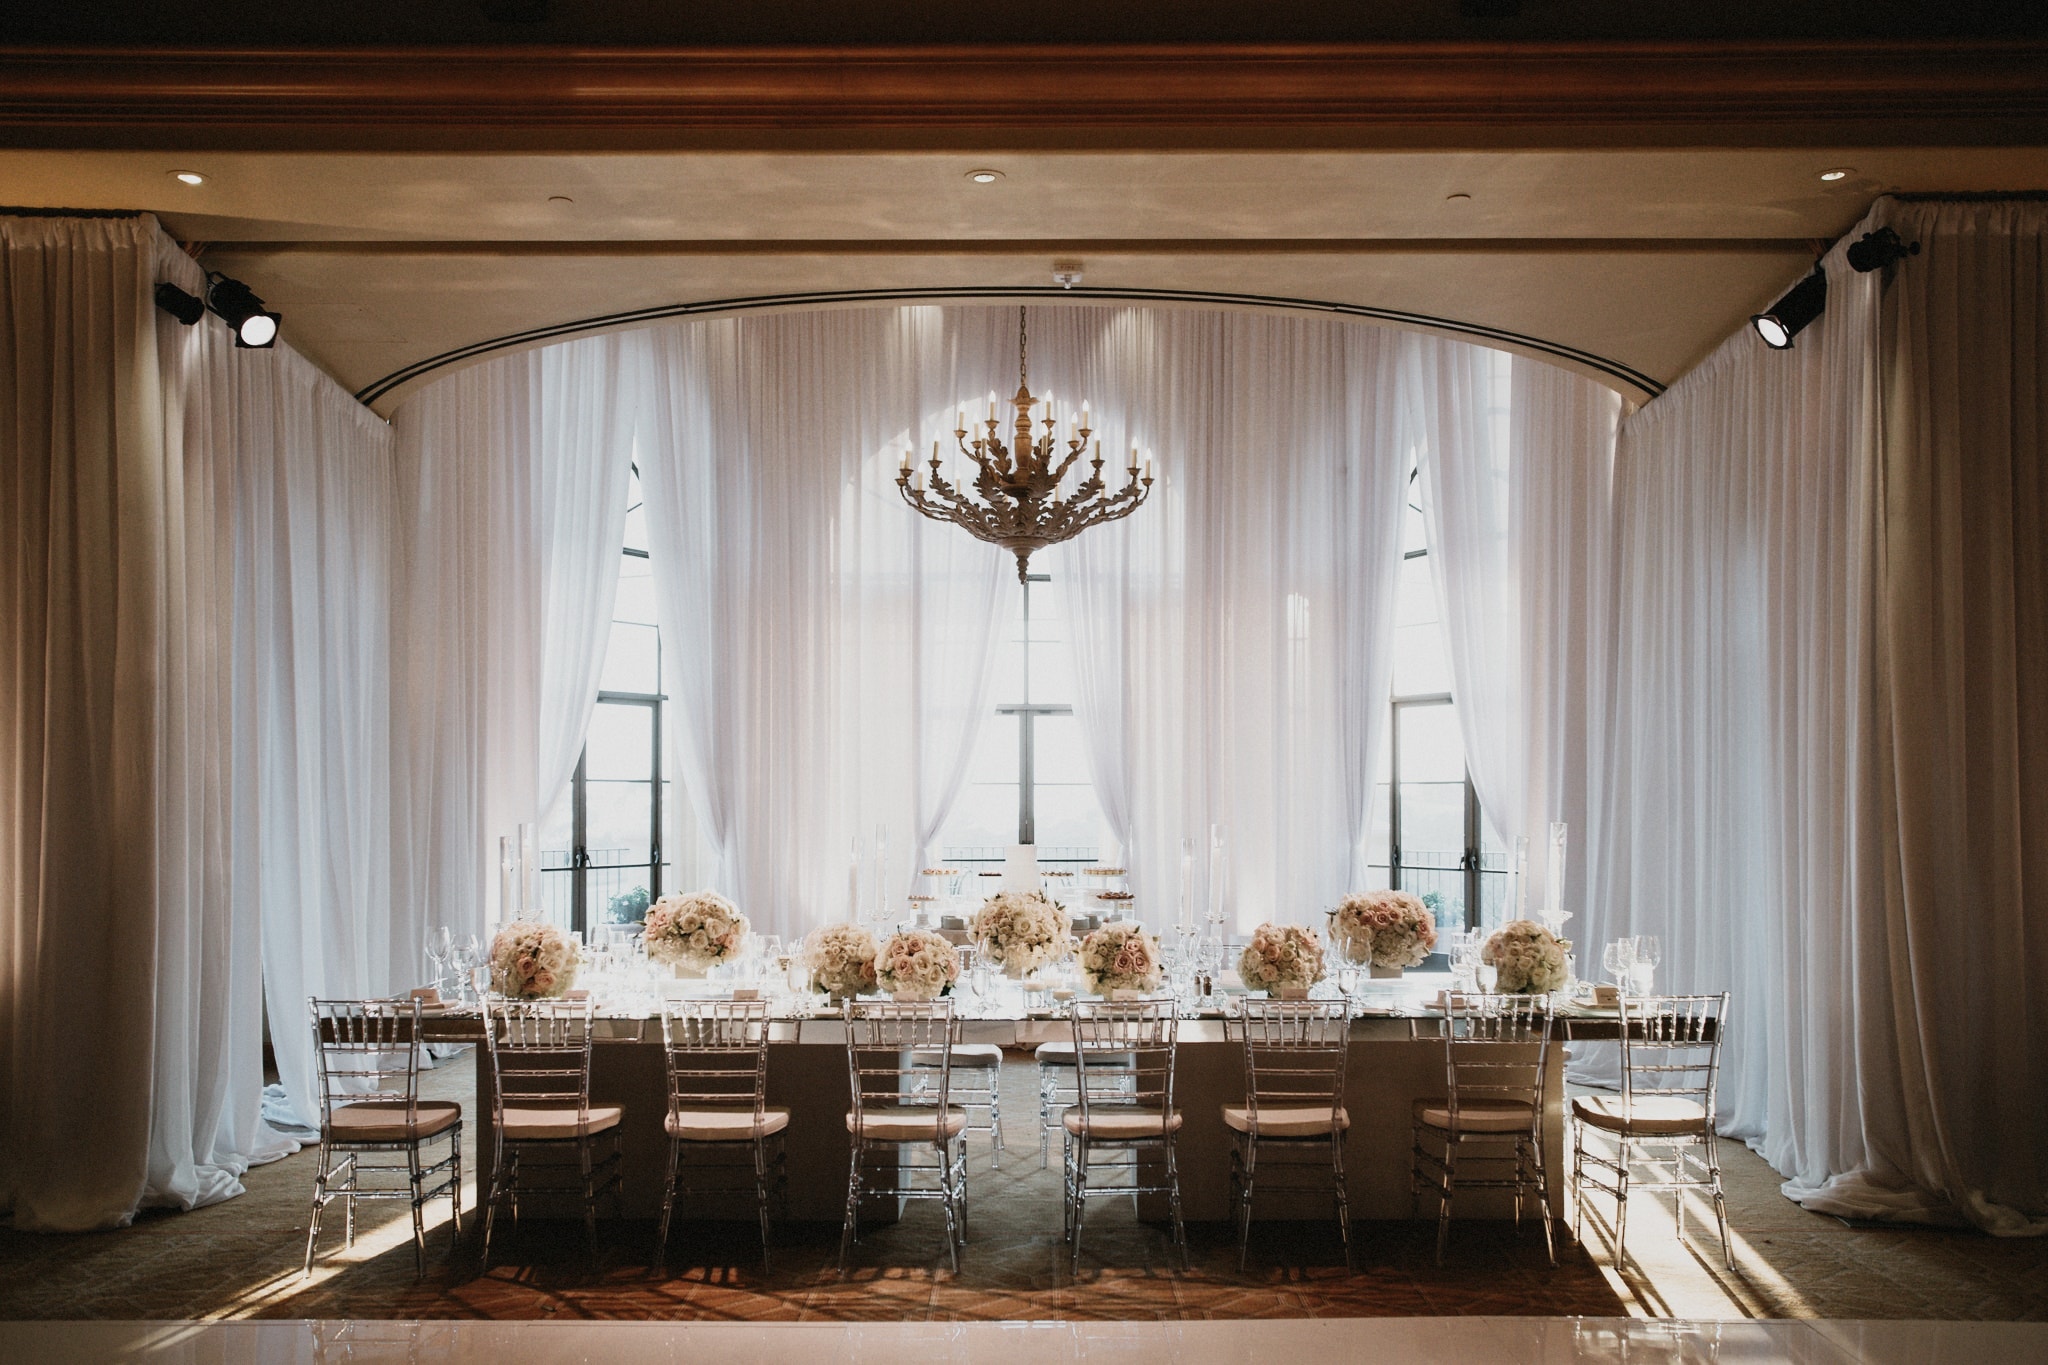 A long, beautifully set table awaiting dinner guests during a wedding at Pelican Hill Resort in Newport Beach.